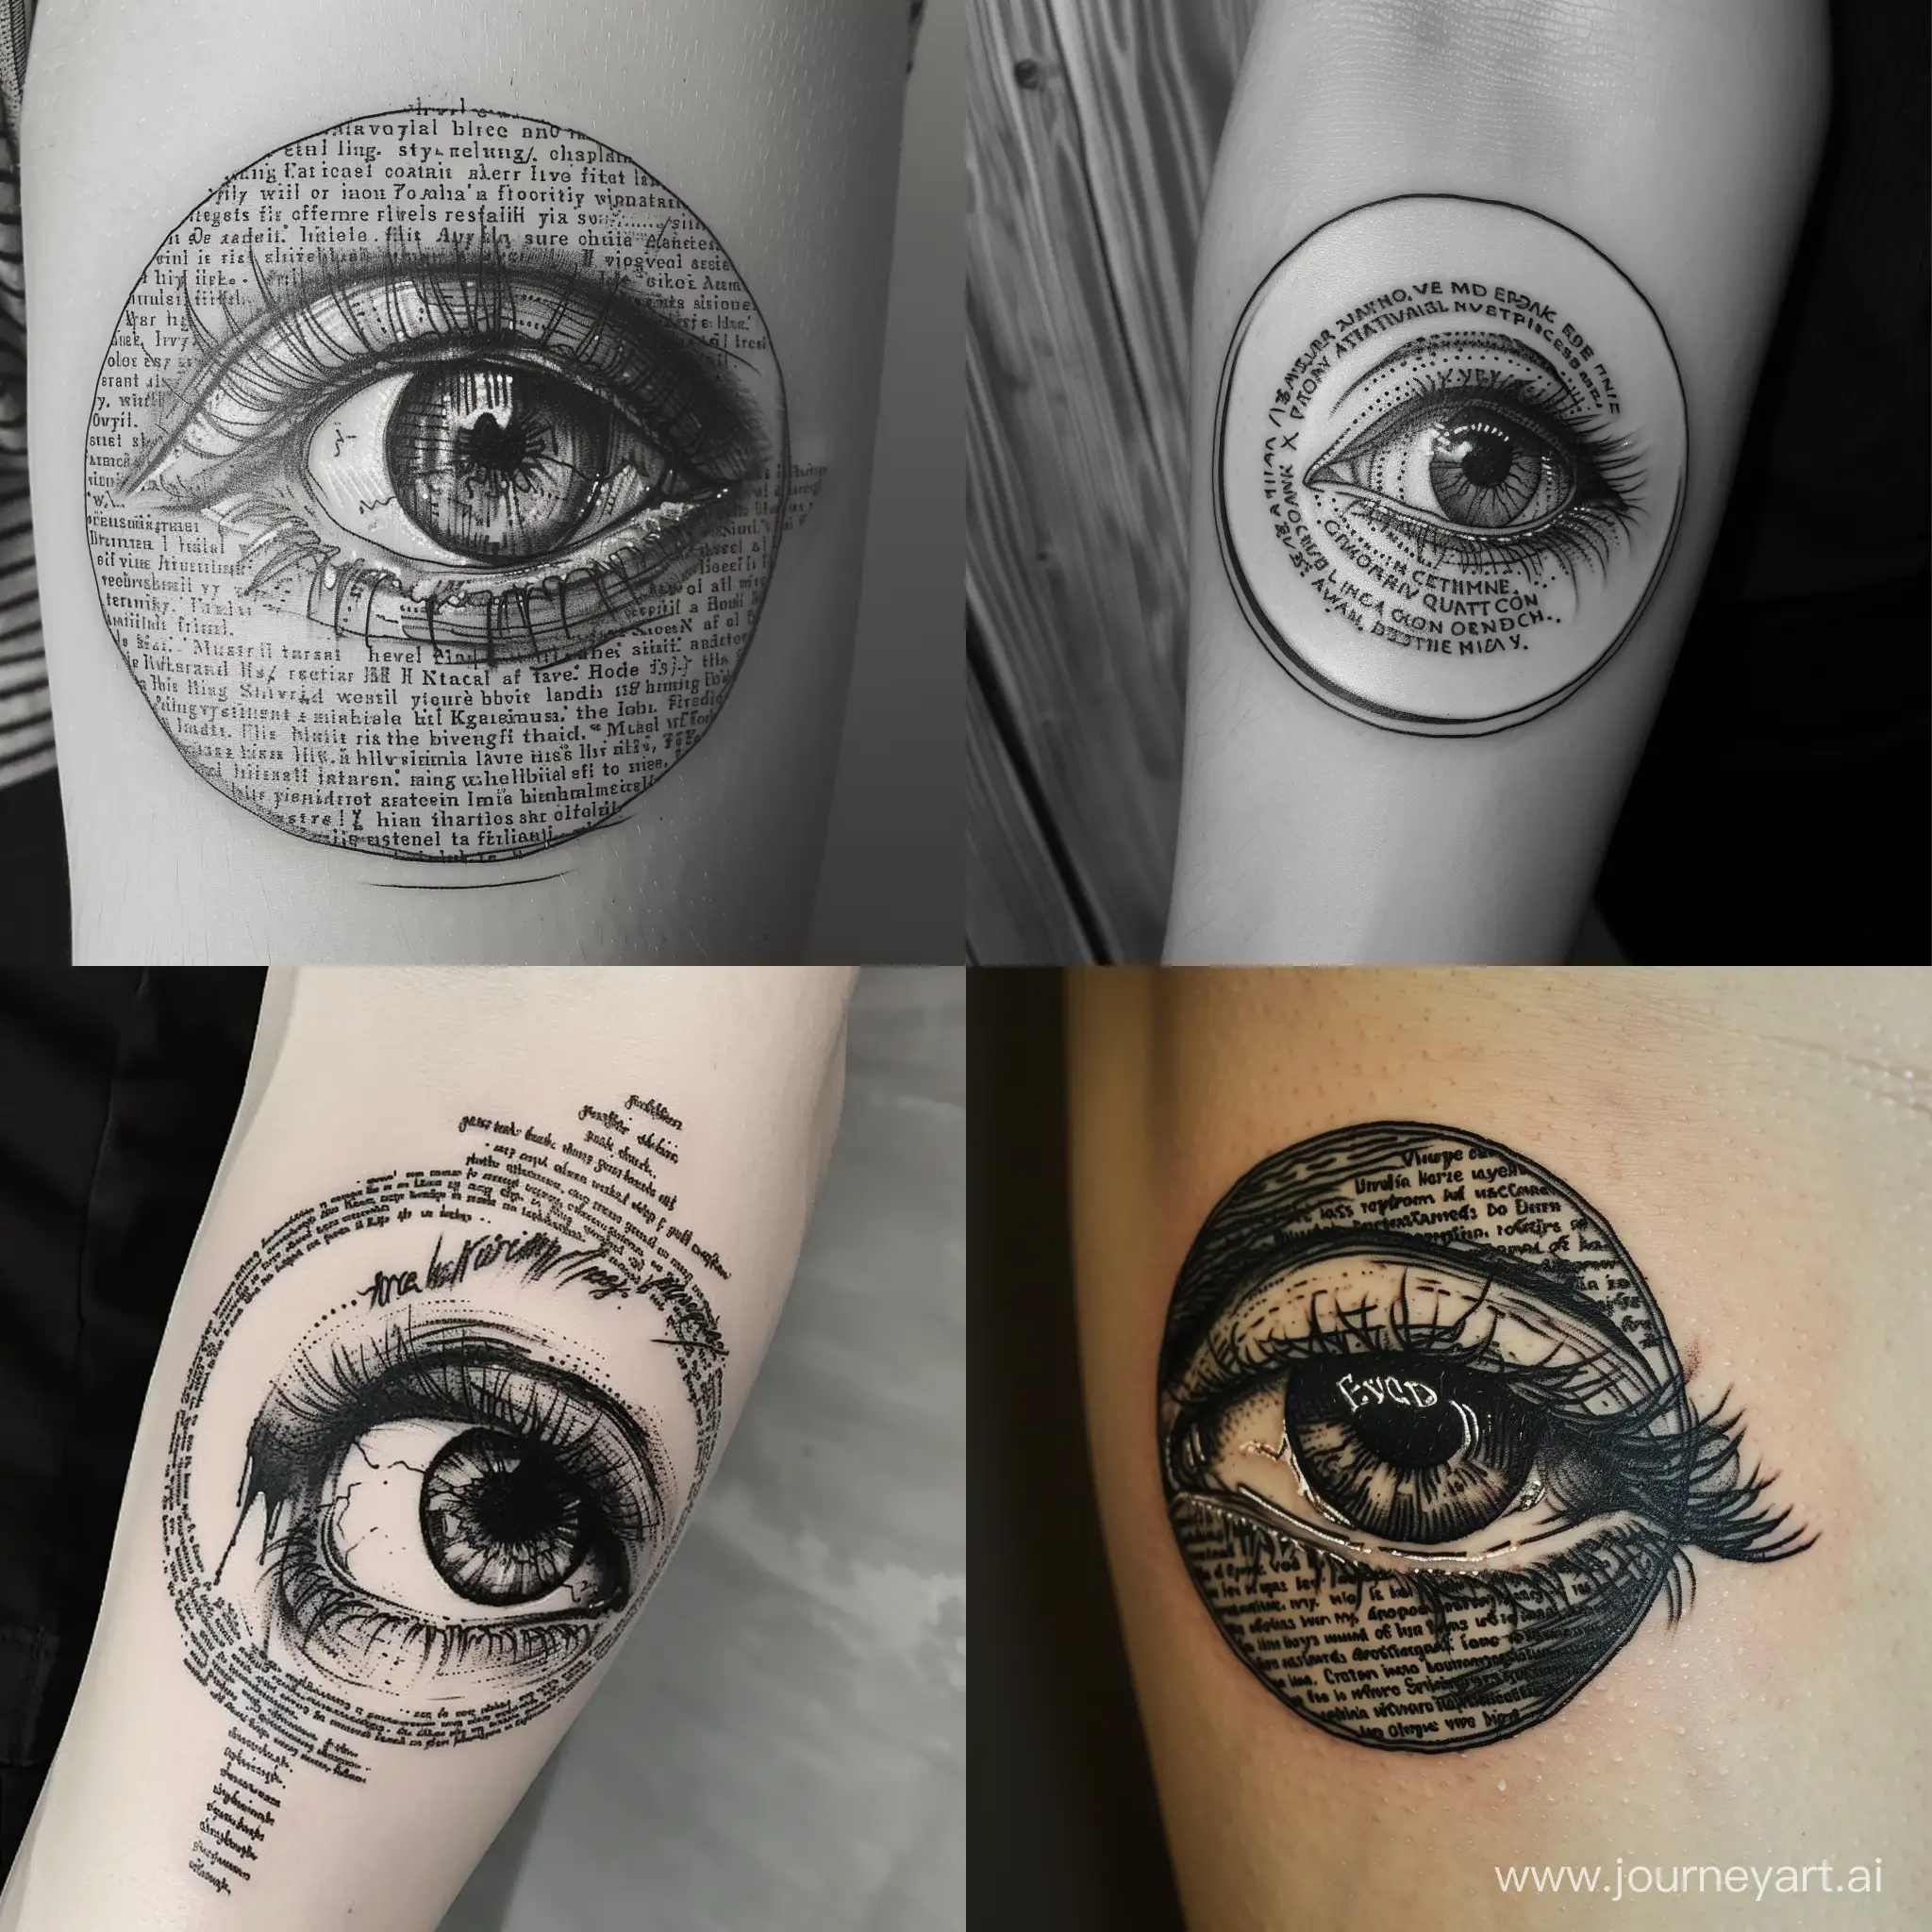 CREATE AN EYE TATTOO IN CIRCLE WITH TEXT